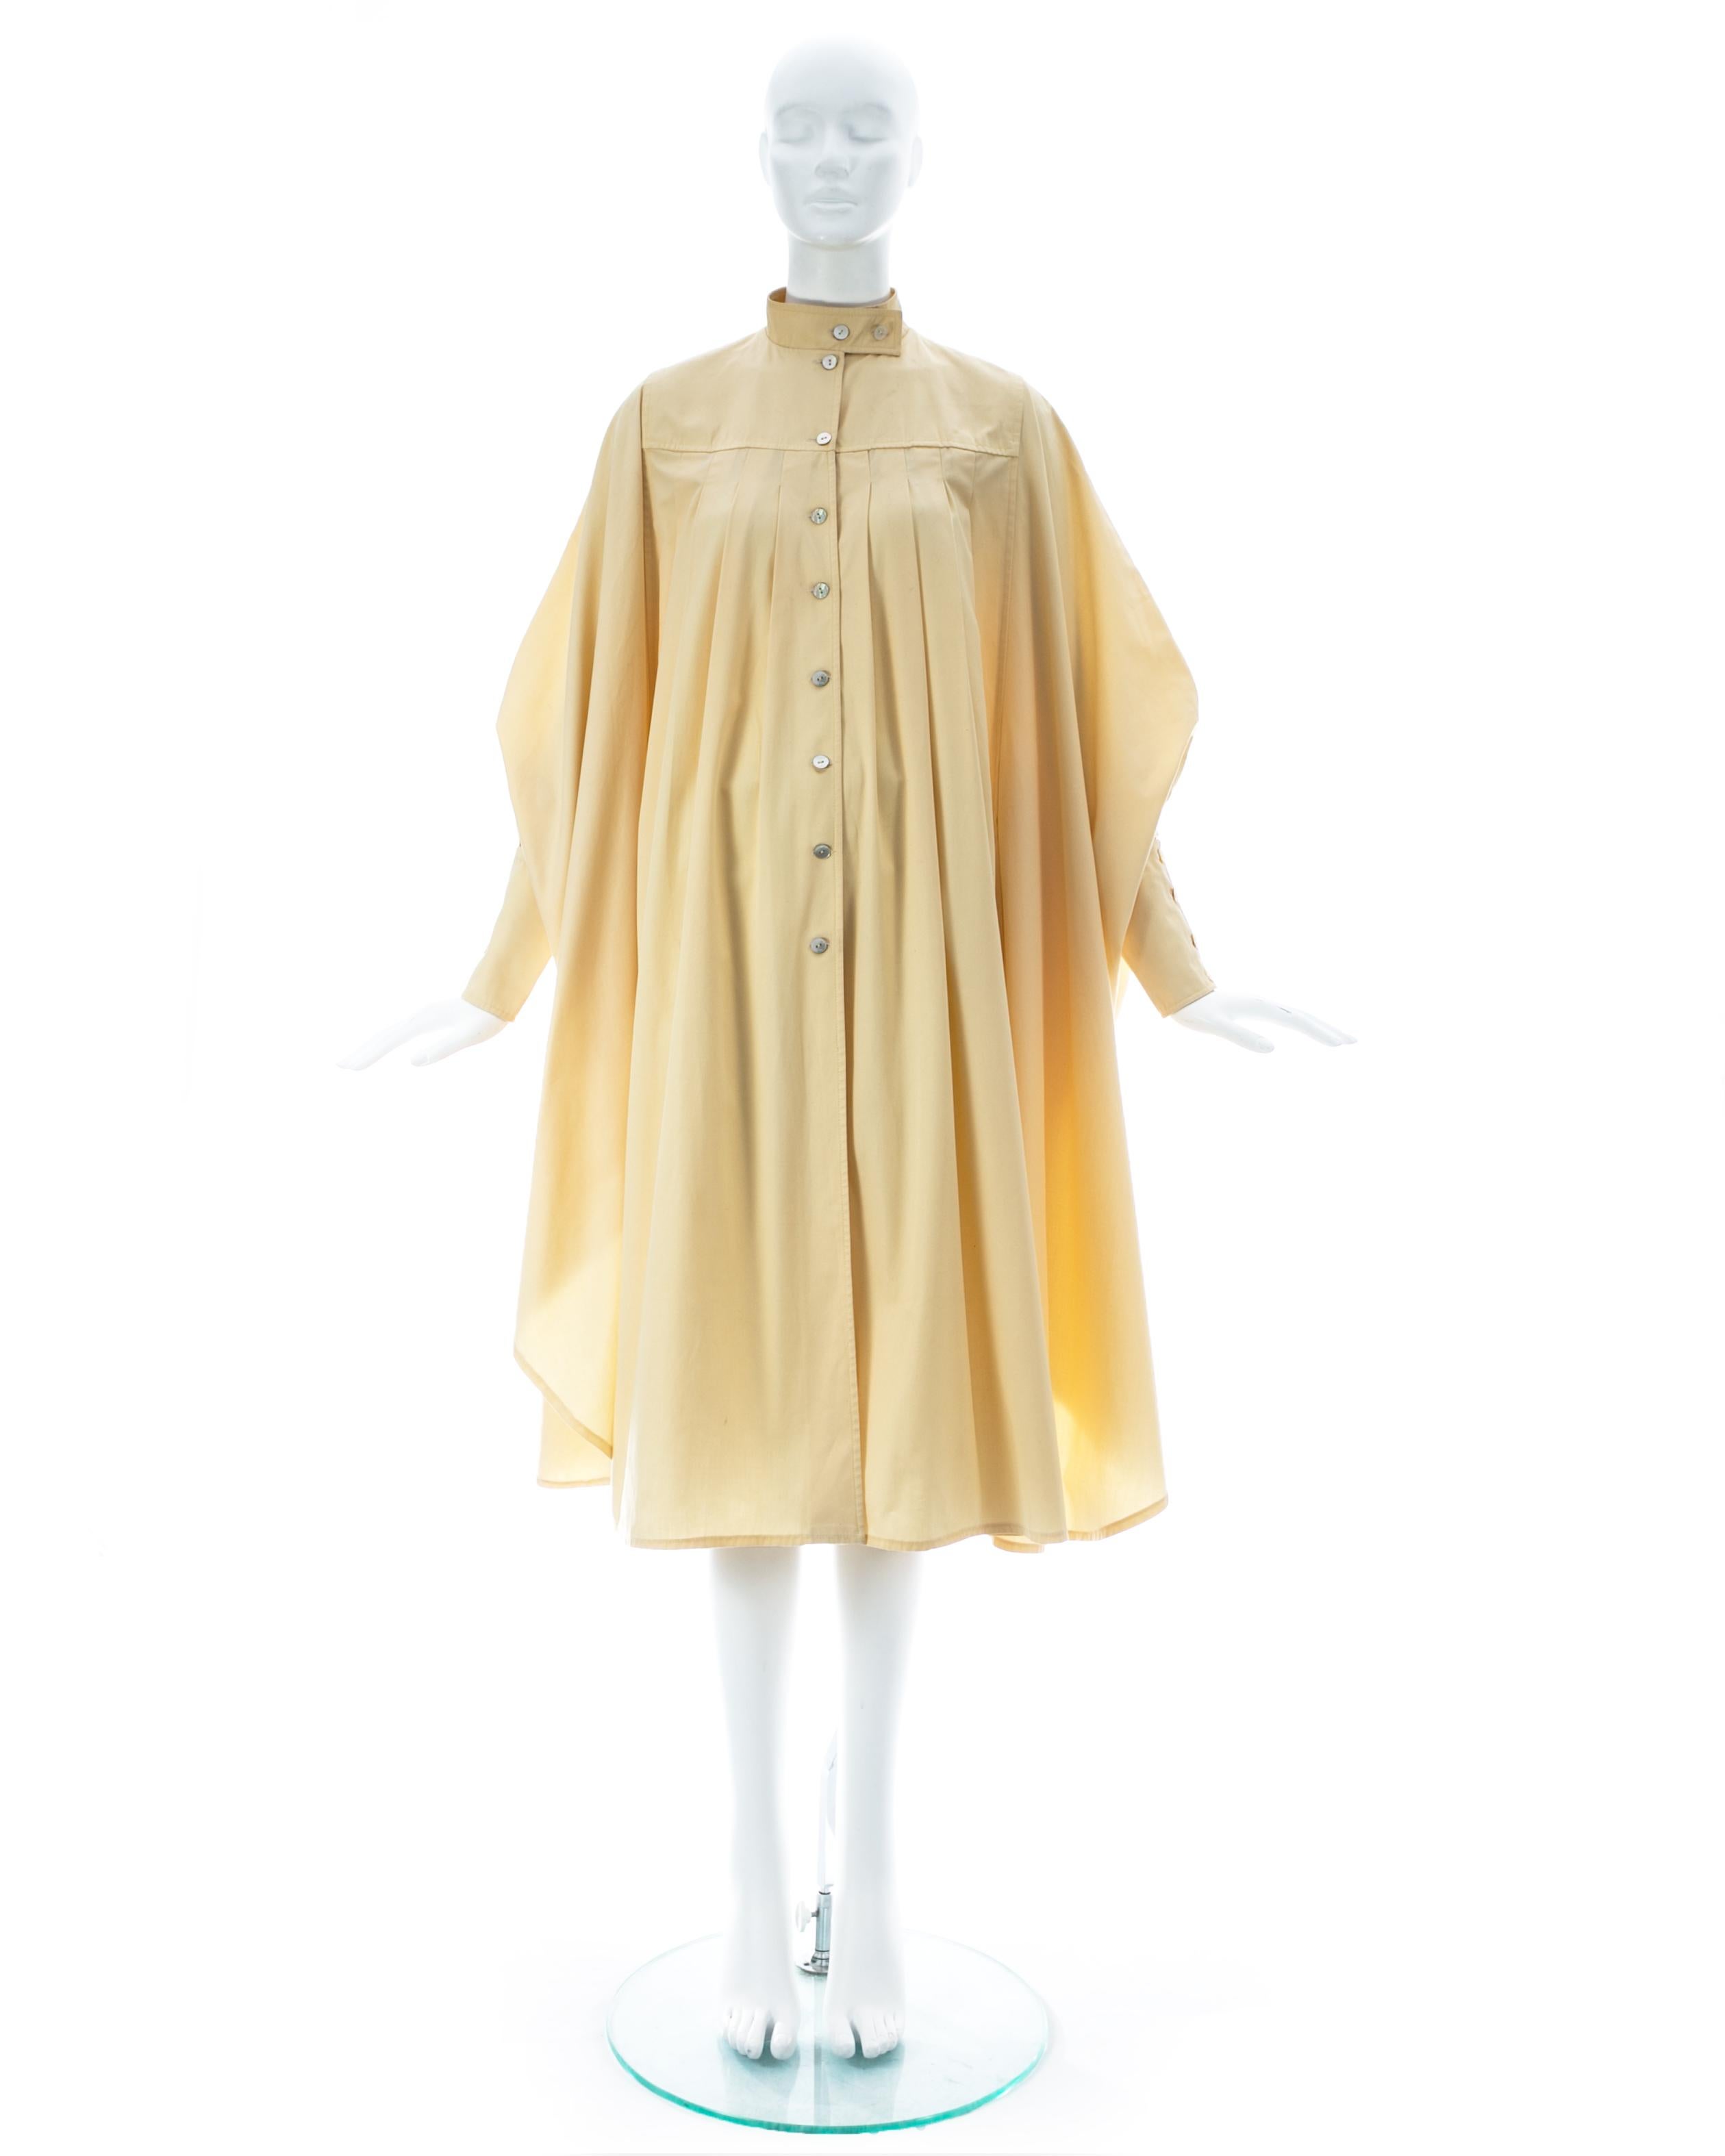 Cream cotton coat with box pleats, 2 side pockets, standing collar, and long fitted cuffs

ca. 1978